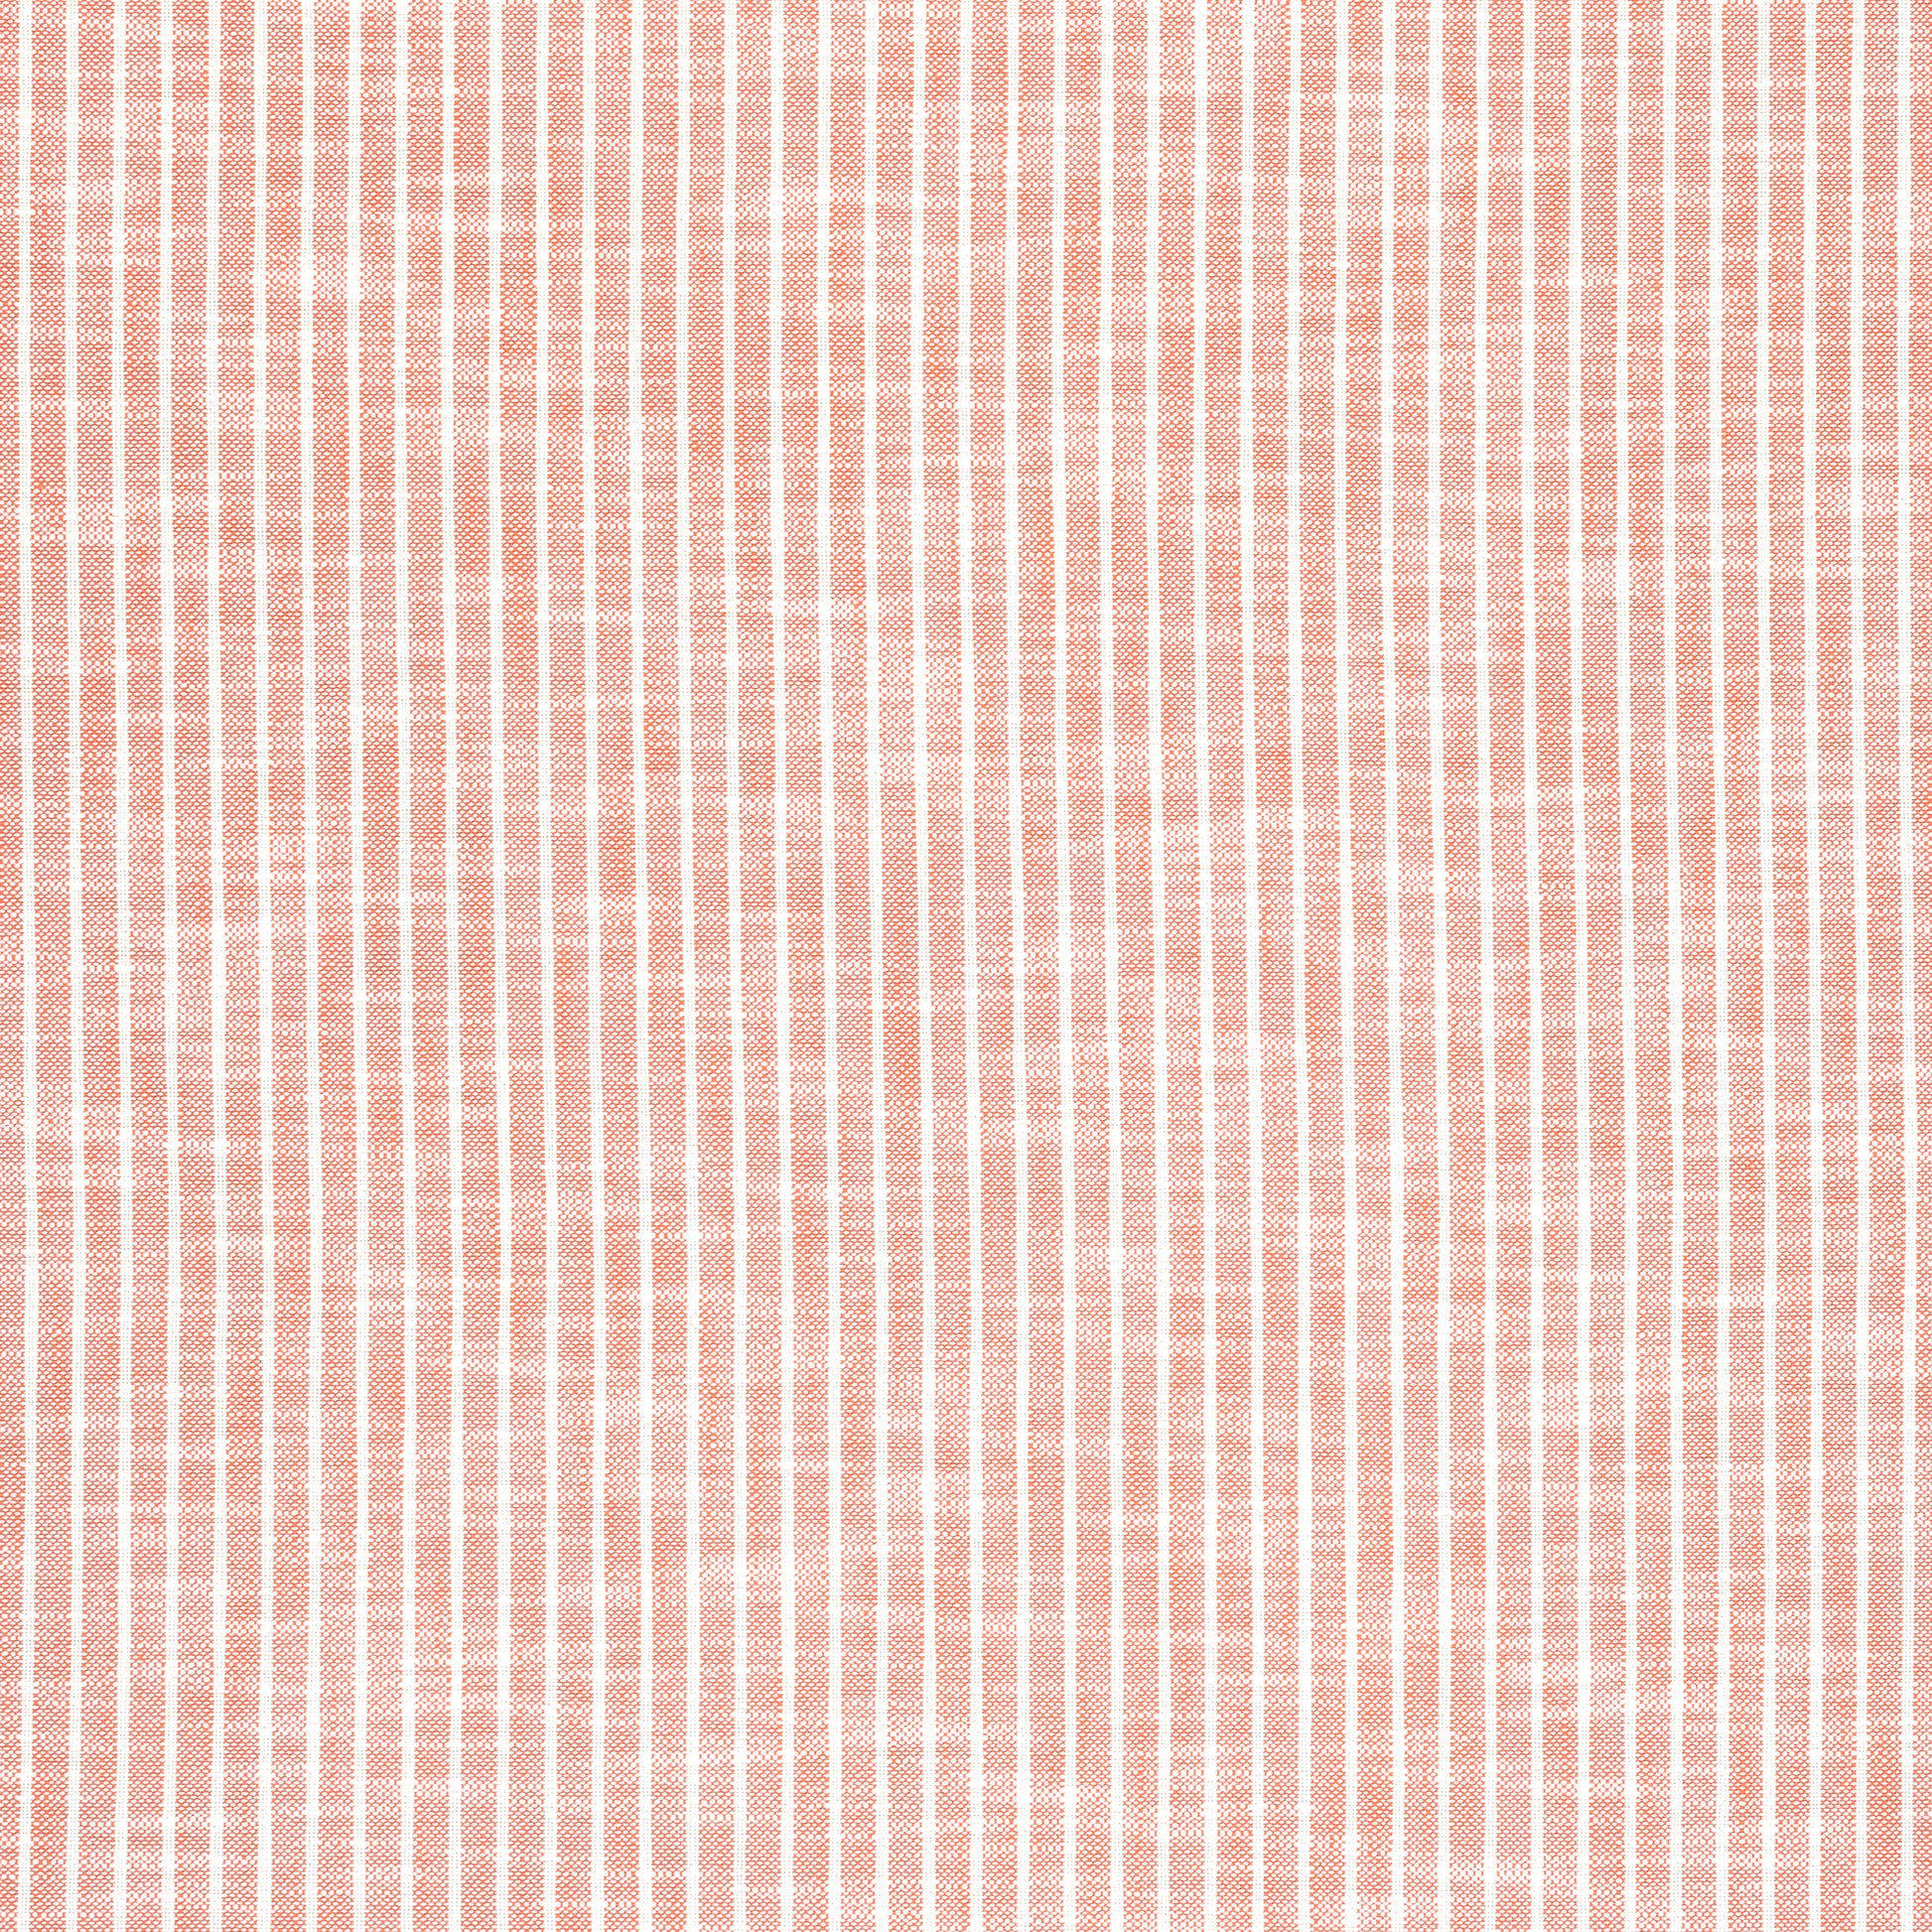 Purchase Thibaut Fabric Product# W73472 pattern name Bayside Stripe color Coral